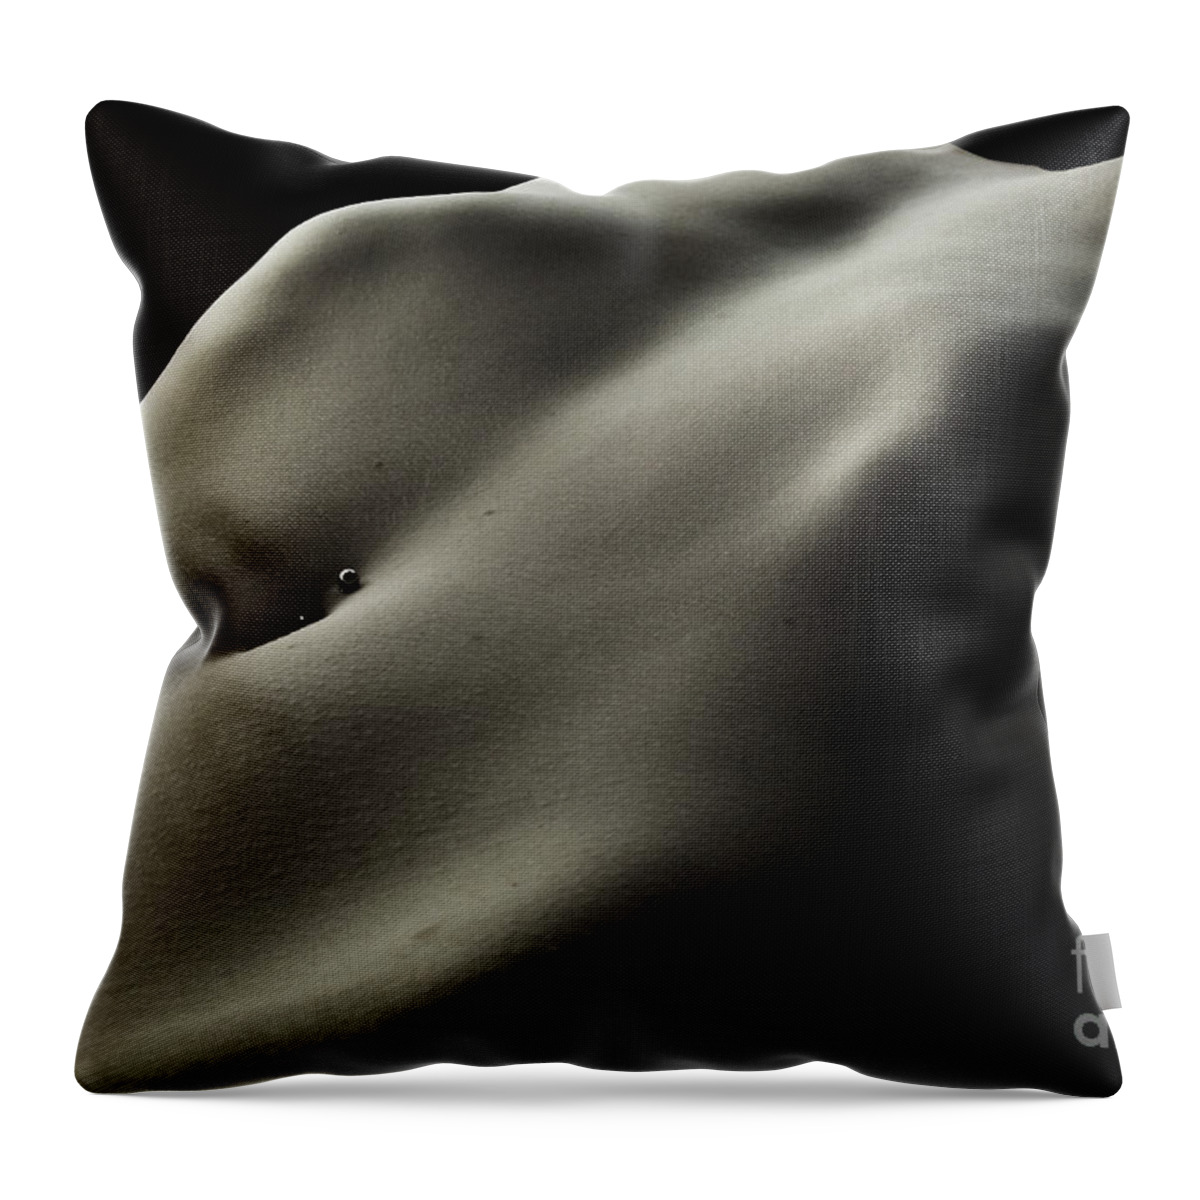 Artistic Throw Pillow featuring the photograph North East by Robert WK Clark